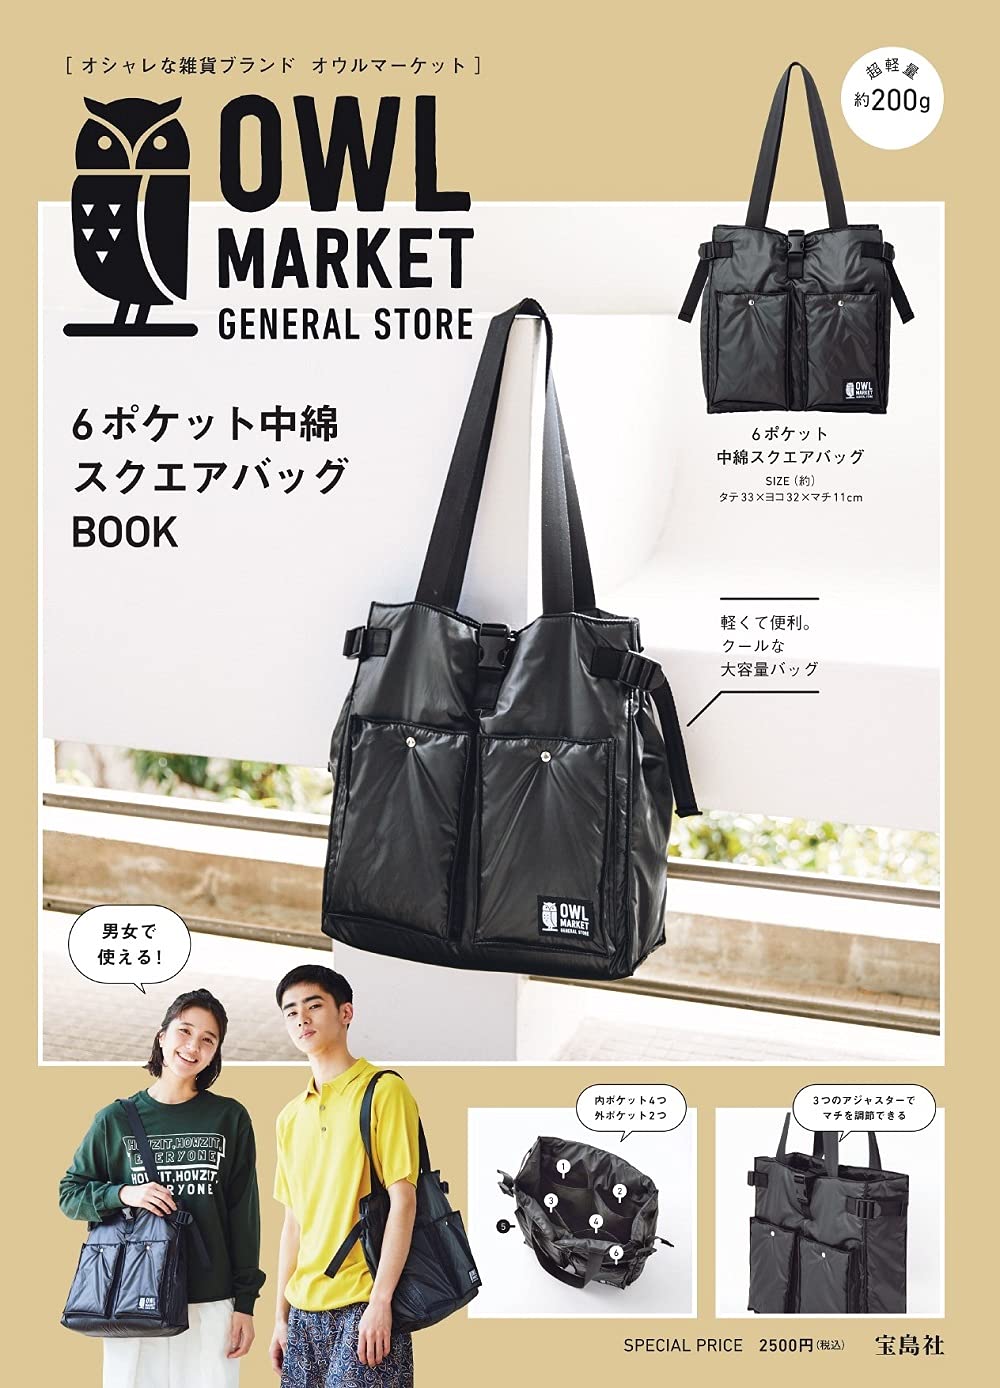 OWL MARKET 6ポケット中綿スクエアバッグBOOK